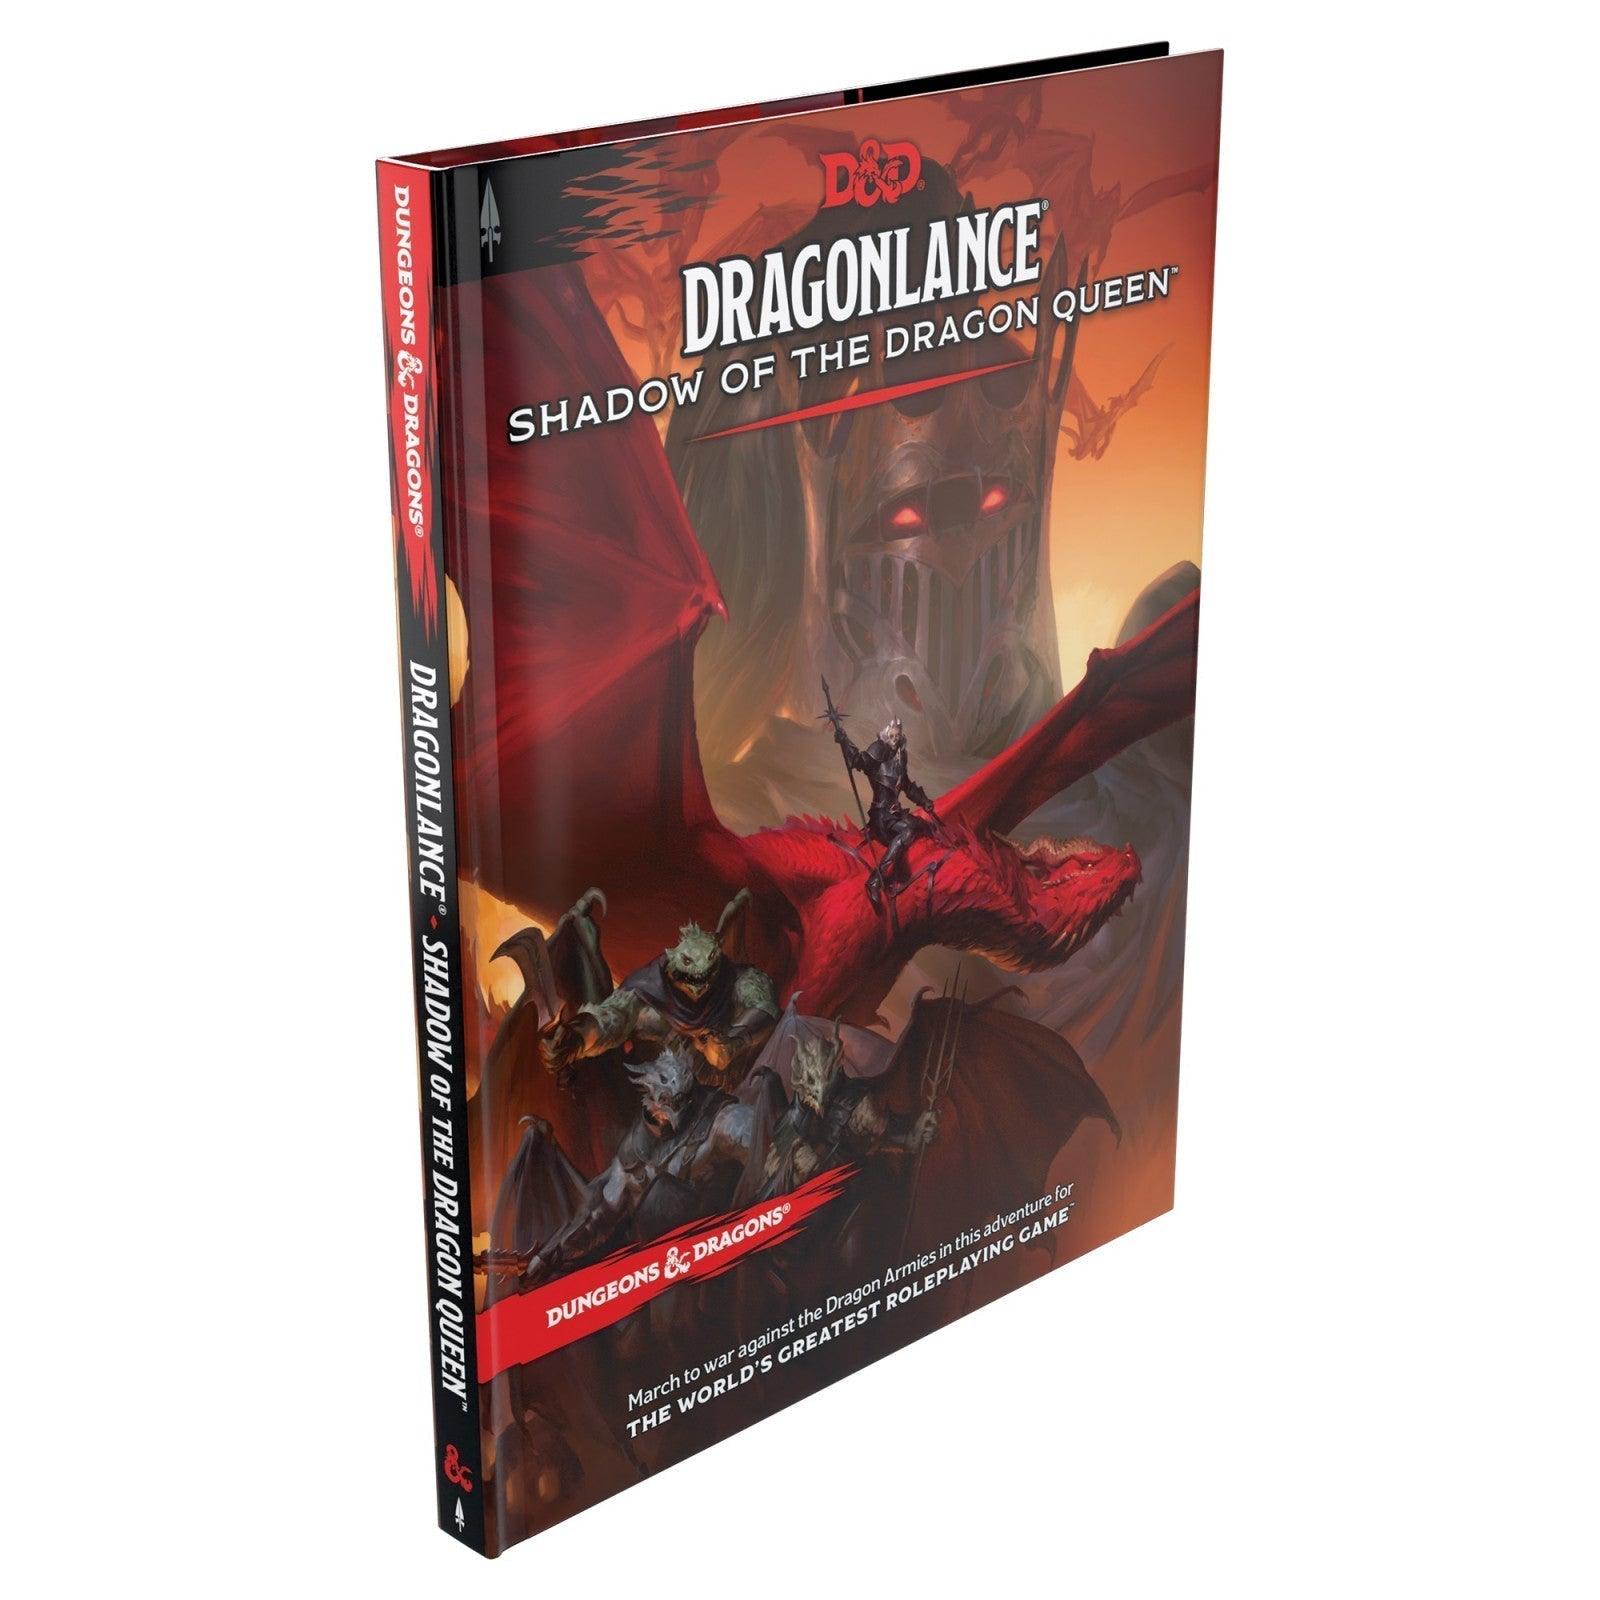 VR-101548 D&D Dungeons & Dragons Dragonlance Shadow of the Dragon Queen Hardcover - Wizards of the Coast - Titan Pop Culture